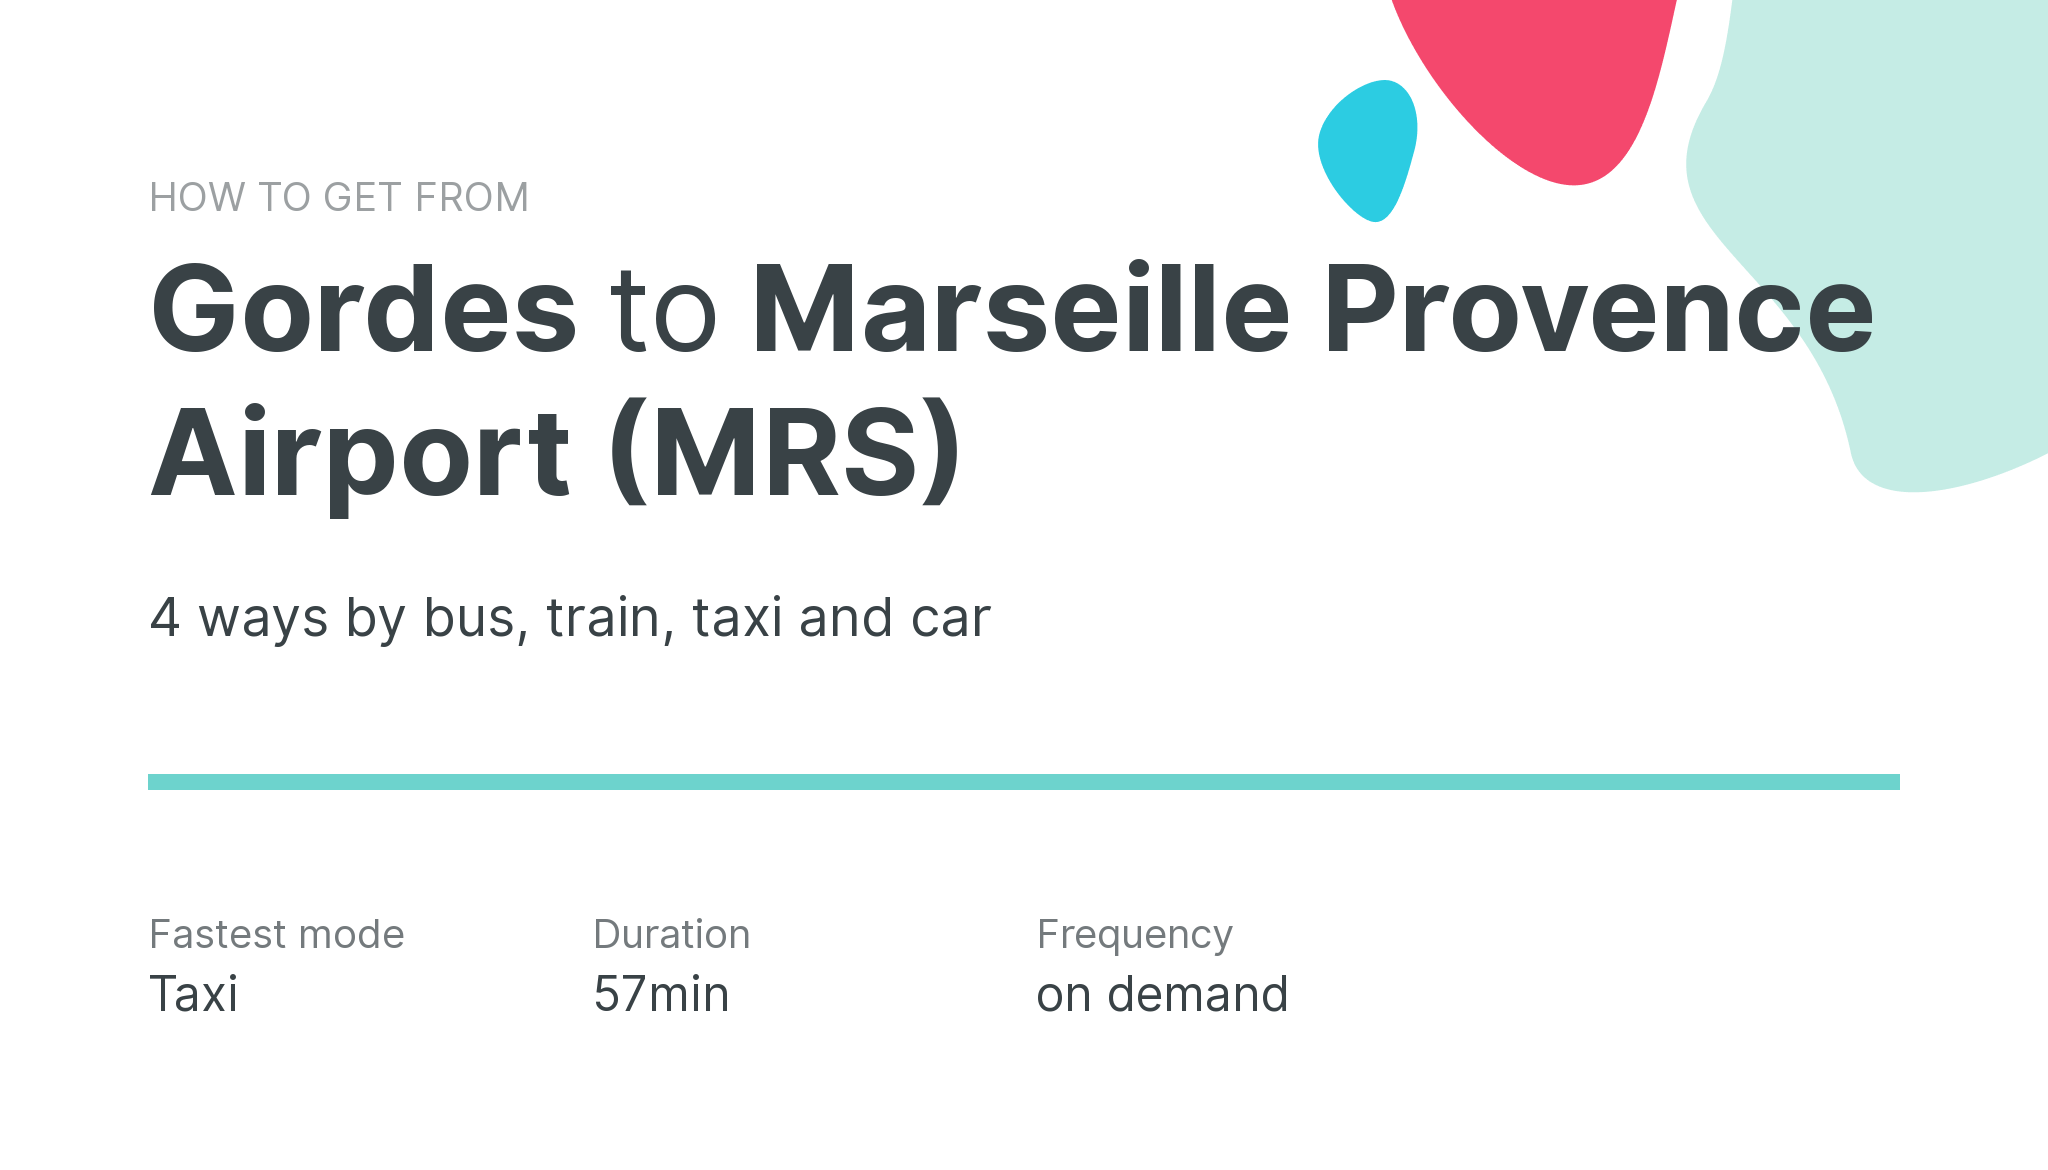 How do I get from Gordes to Marseille Provence Airport (MRS)